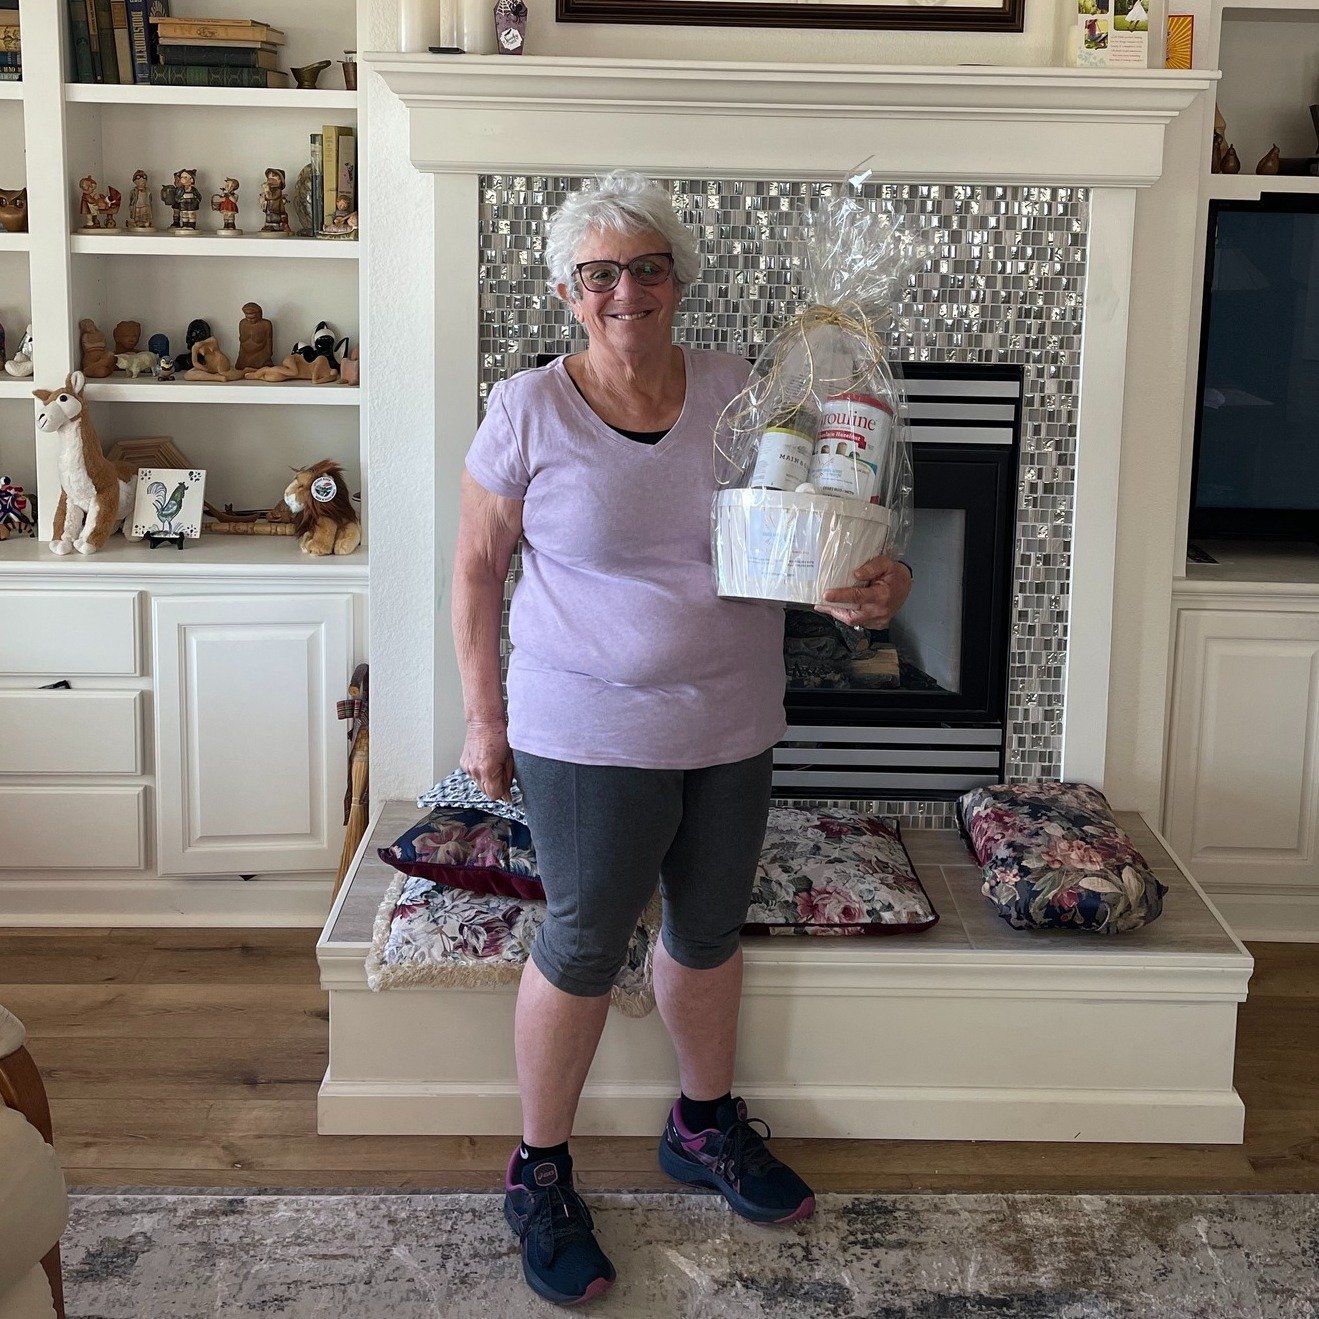 🎉 Meet our Winner! 🌟 

Last week we held a raffle at the Sun City Lincoln Hills Vendor fair, and today we've drawn our lucky winner! Meet Mary, a proud resident of the Sun City Lincoln Hills community. Her hobbies include quilting and traveling. Sh